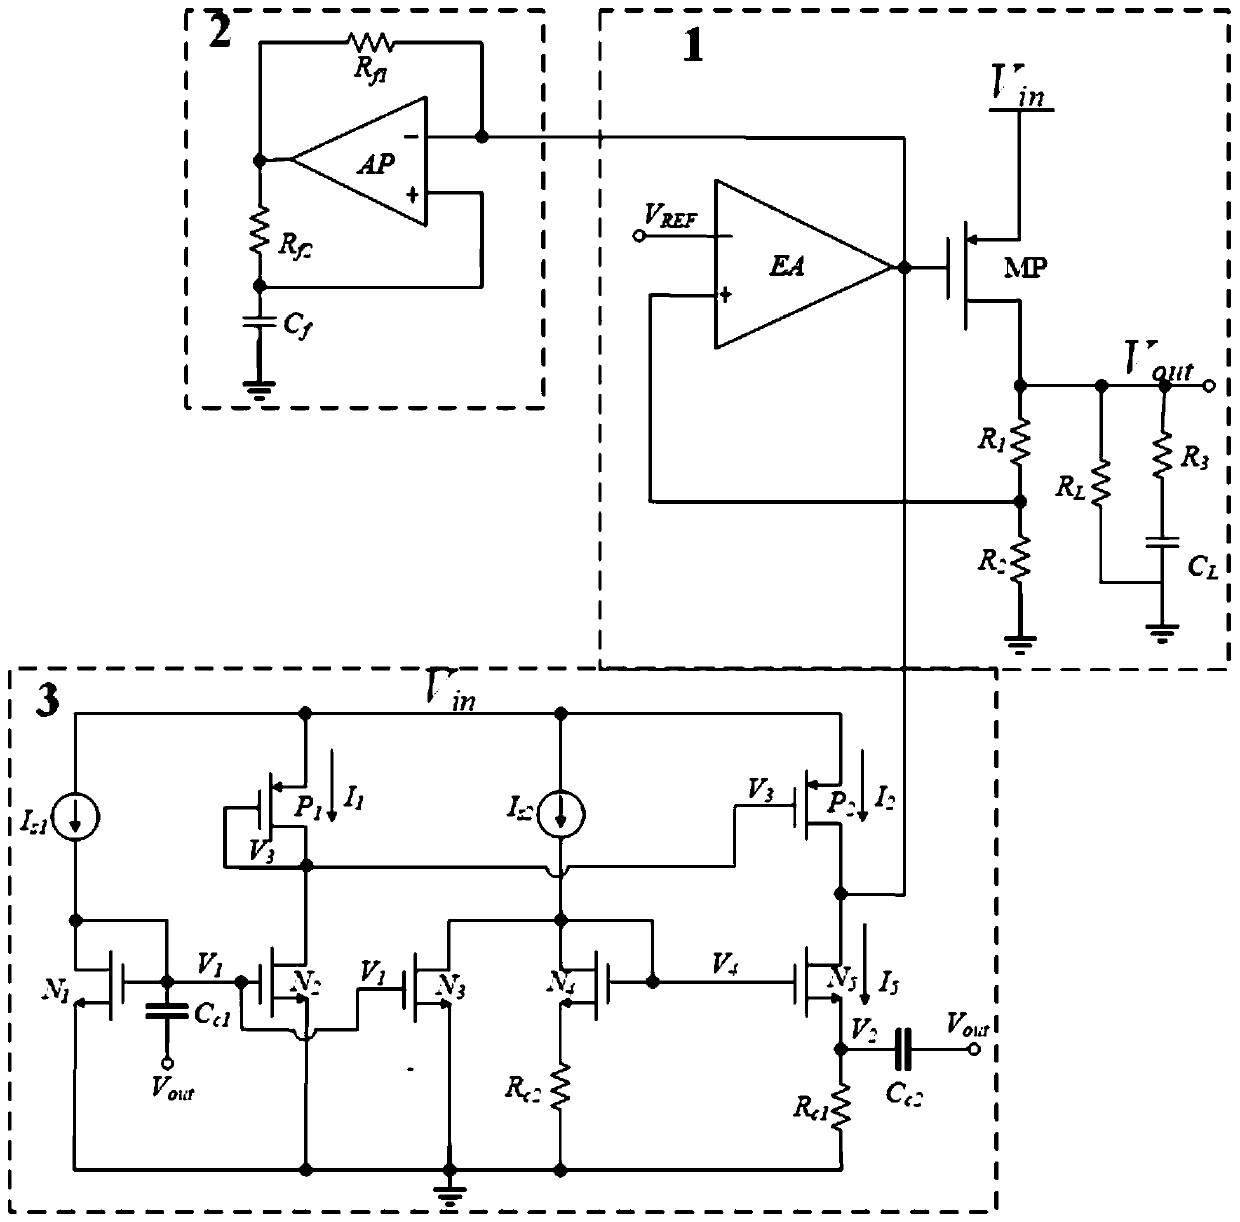 Power supply rejection ratio and trainset response-enhanced LDO circuit